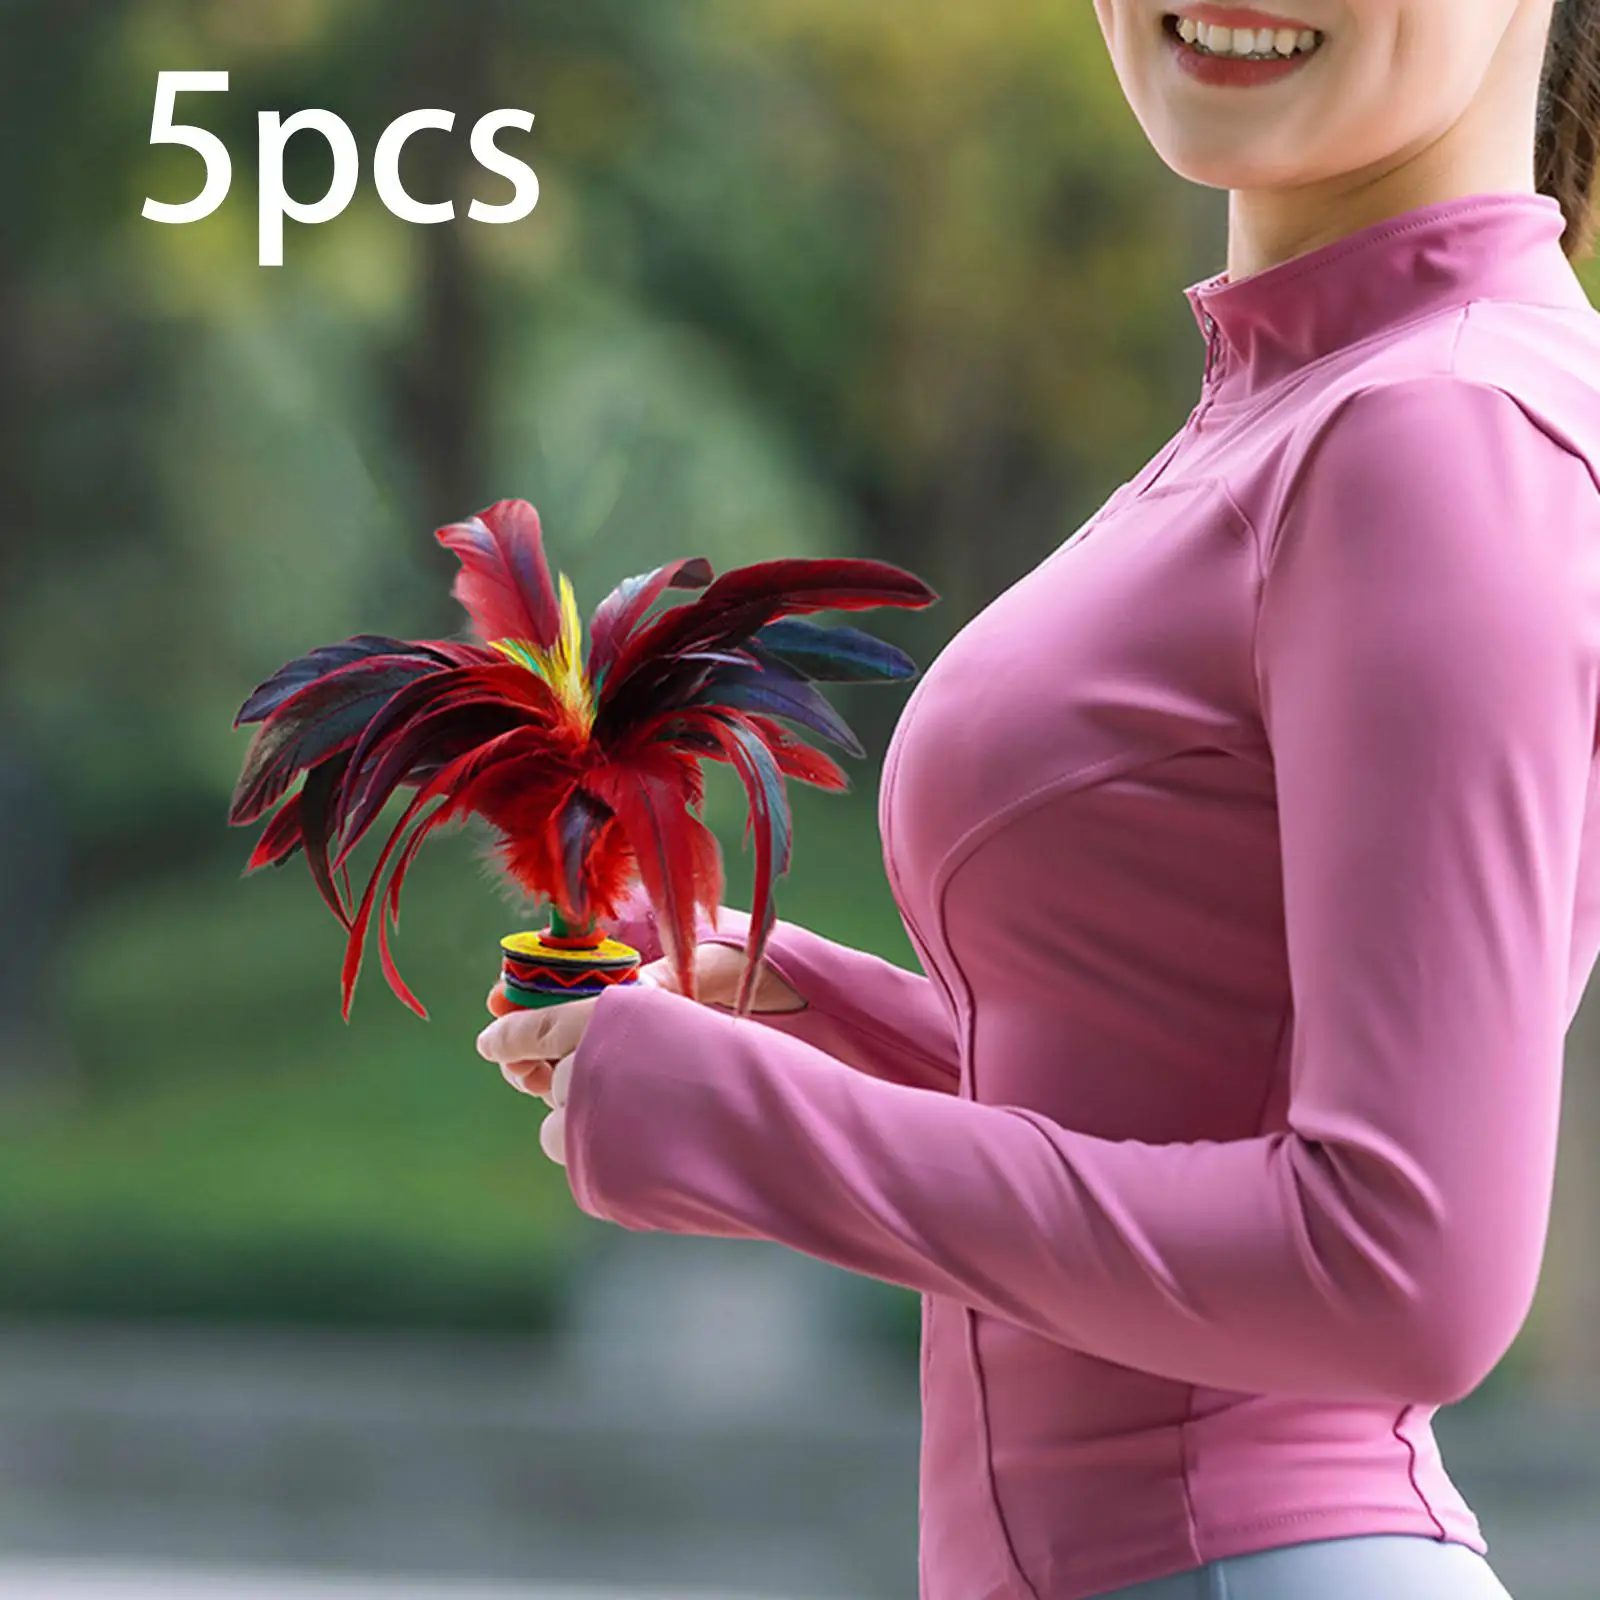 5 Pieces Shuttlecock for Children Exercise Muscle Strength for Kids Adults